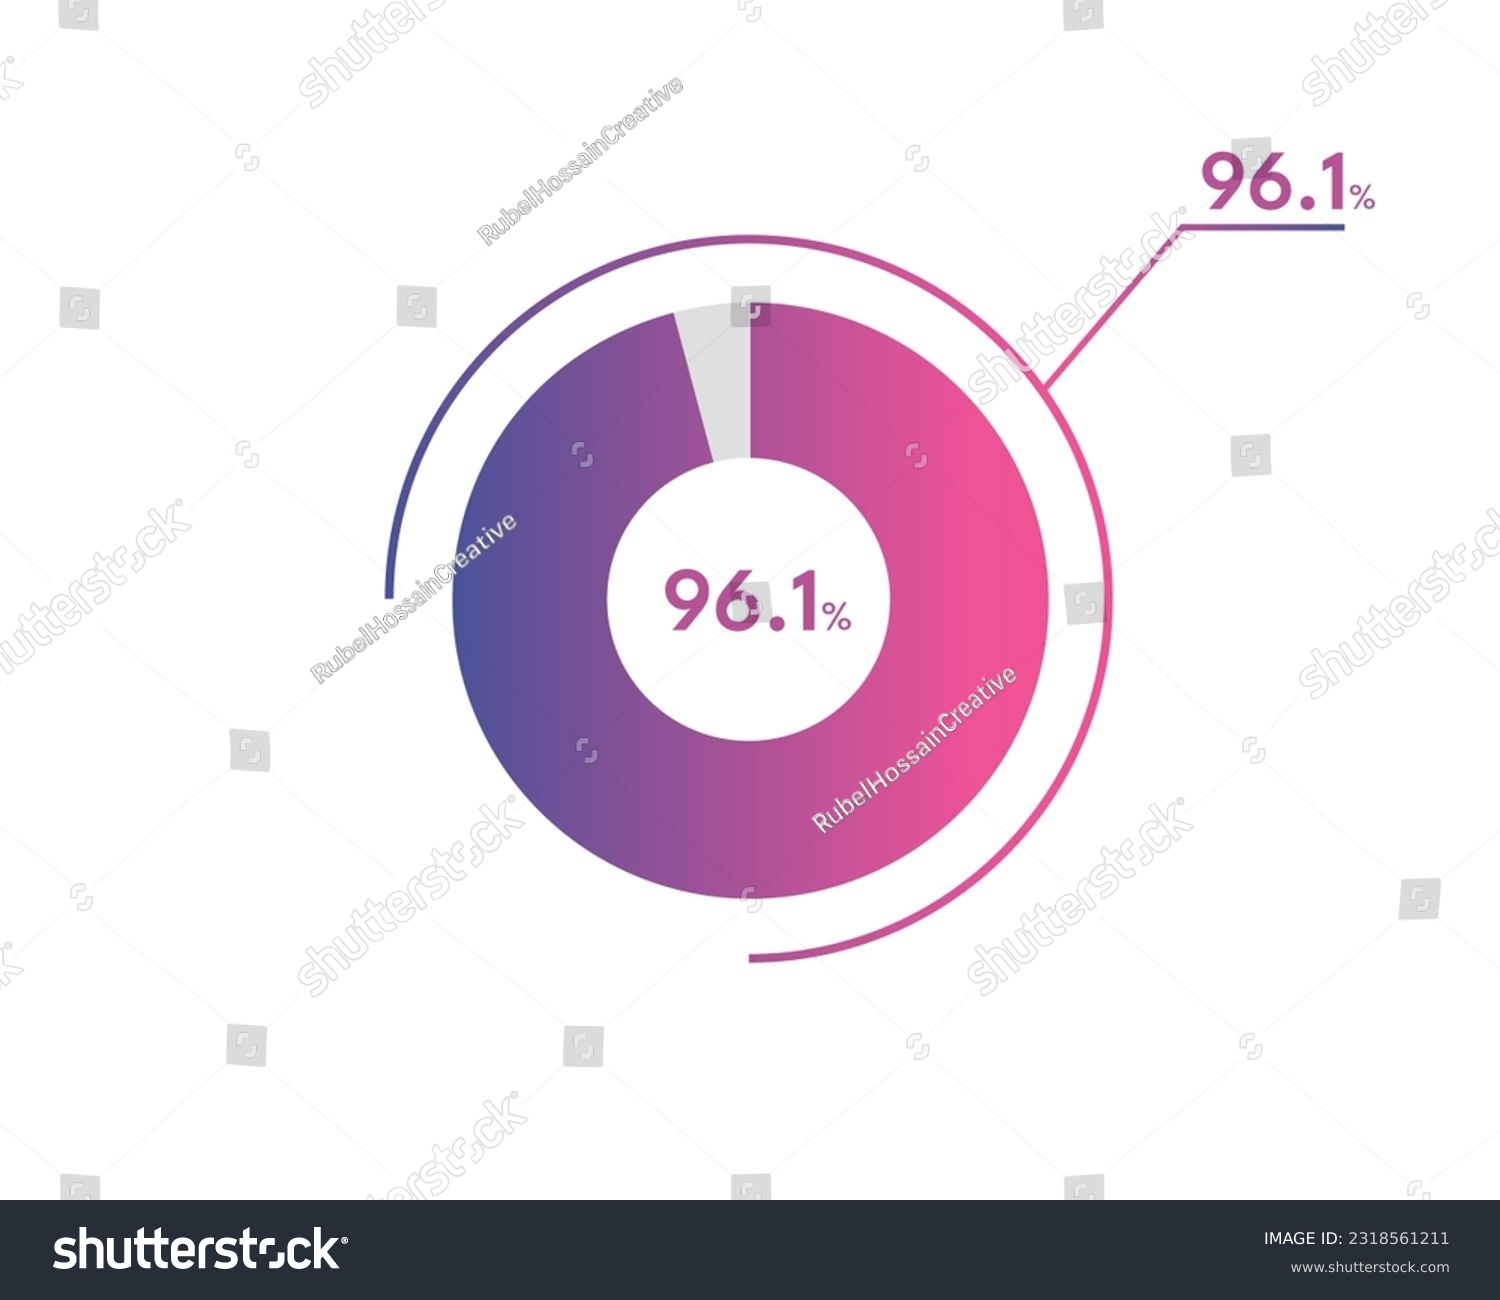 SVG of 96.1 Percentage circle diagrams Infographics vector, circle diagram business illustration, Designing the 96.1% Segment in the Pie Chart. svg